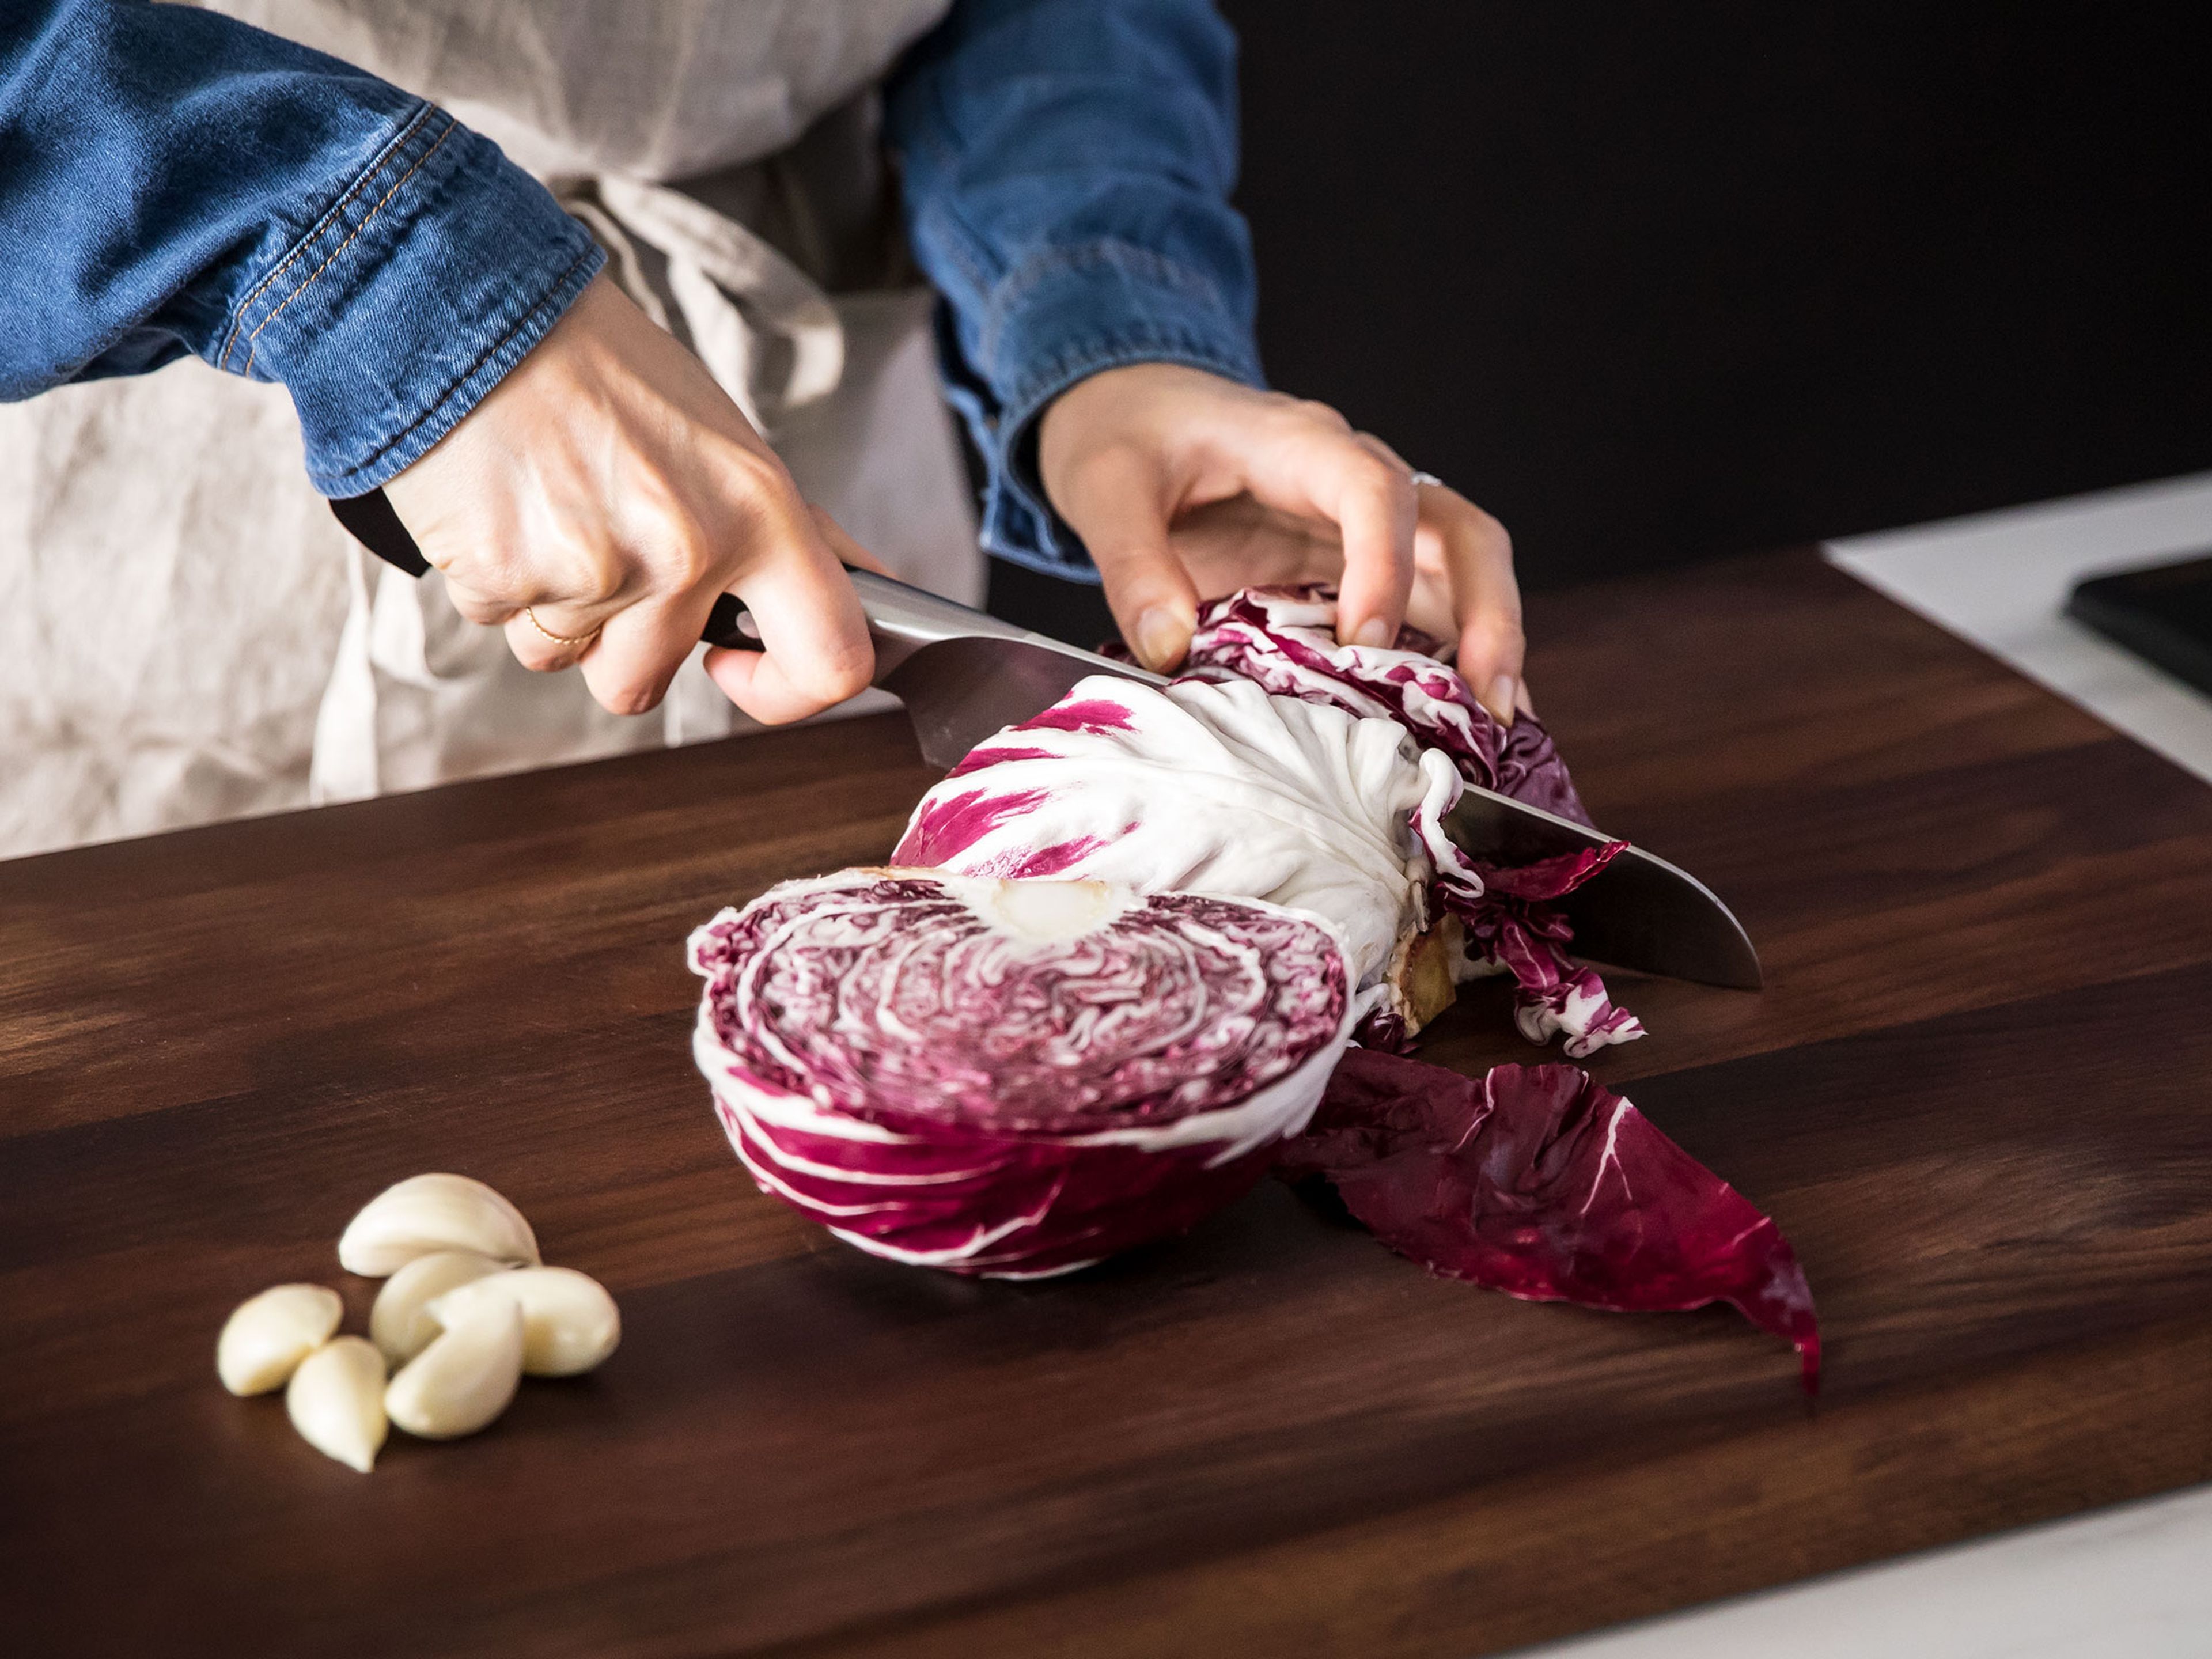 Season the chicken on both sides with salt and pepper.  Core the radicchio and cut into thin wedges. Peel the garlic cloves and crush them.